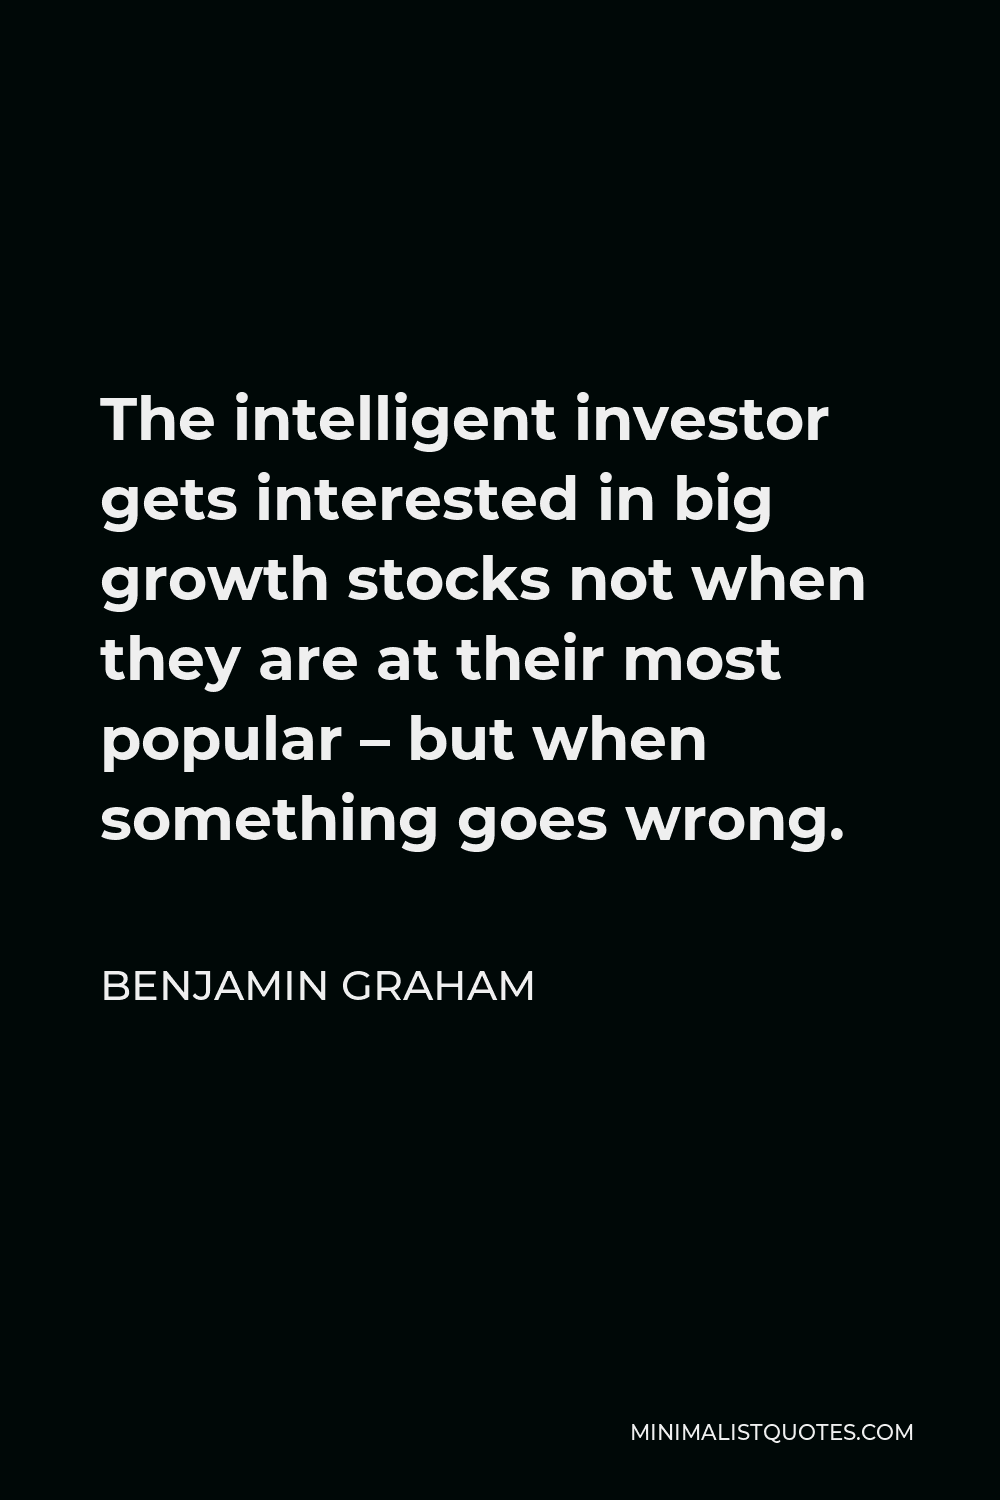 Benjamin Graham Quote - The intelligent investor gets interested in big growth stocks not when they are at their most popular – but when something goes wrong.